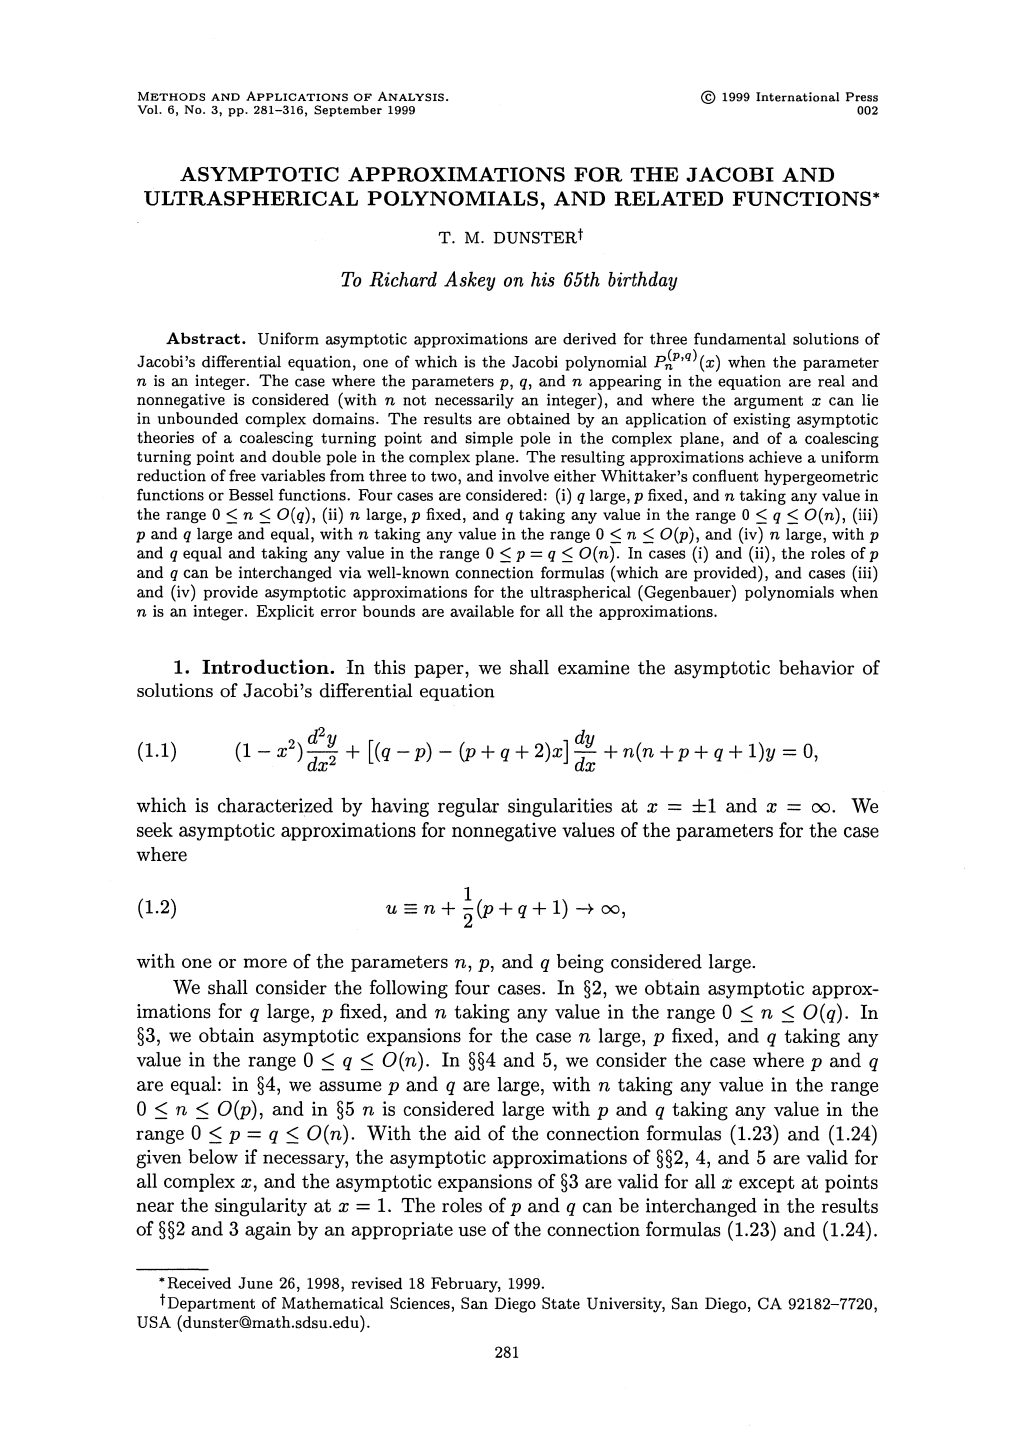 Asymptotic Approximations for the Jacobi and Ultraspherical Polynomials, and Related Functions*